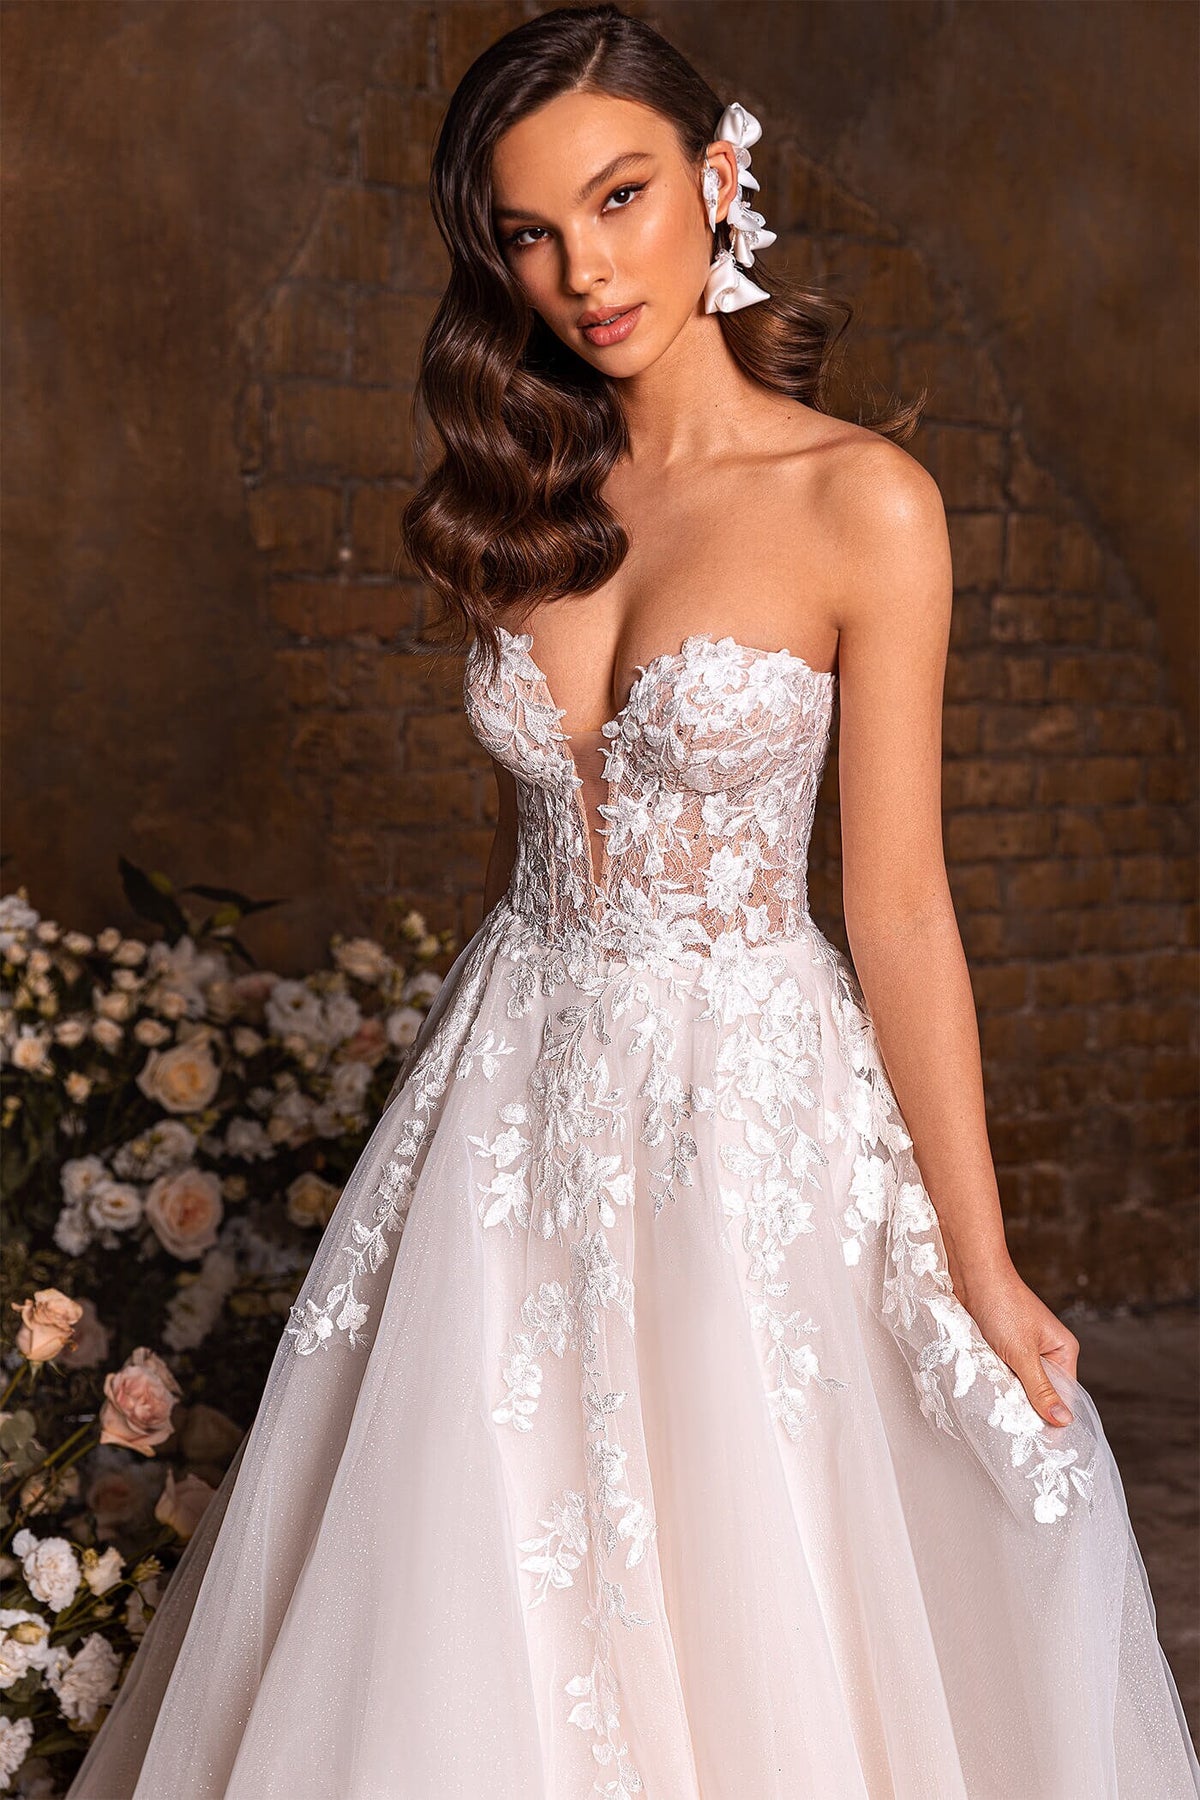 Beautiful Unique Aline Deep V Neckline Sleeveless Strapless Floral Lace Wedding Dress Bridal Gown with Train Backless Romantic Design